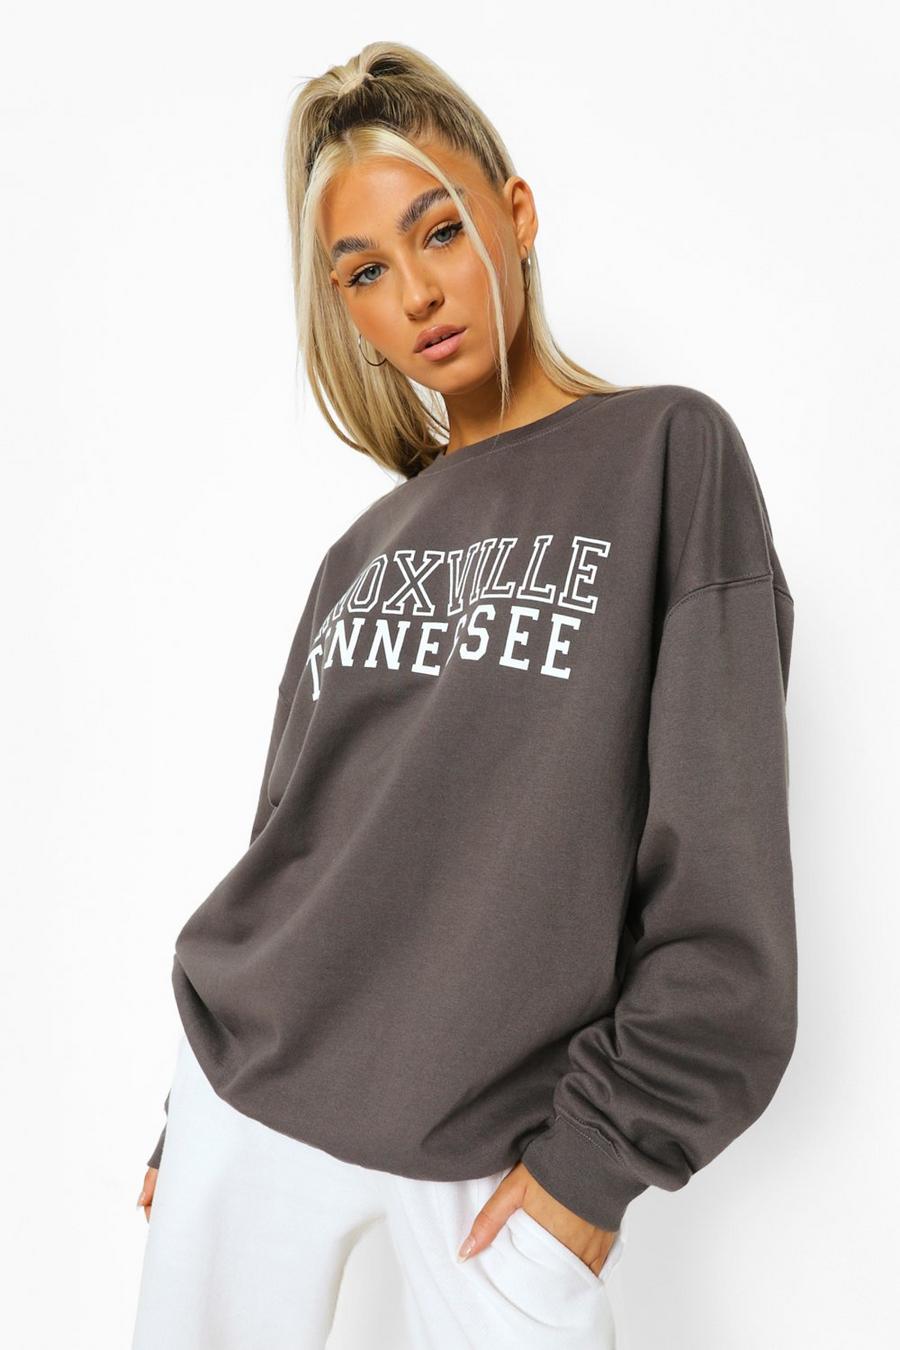 Charcoal Tall - "Knoxville" Oversize sweatshirt image number 1